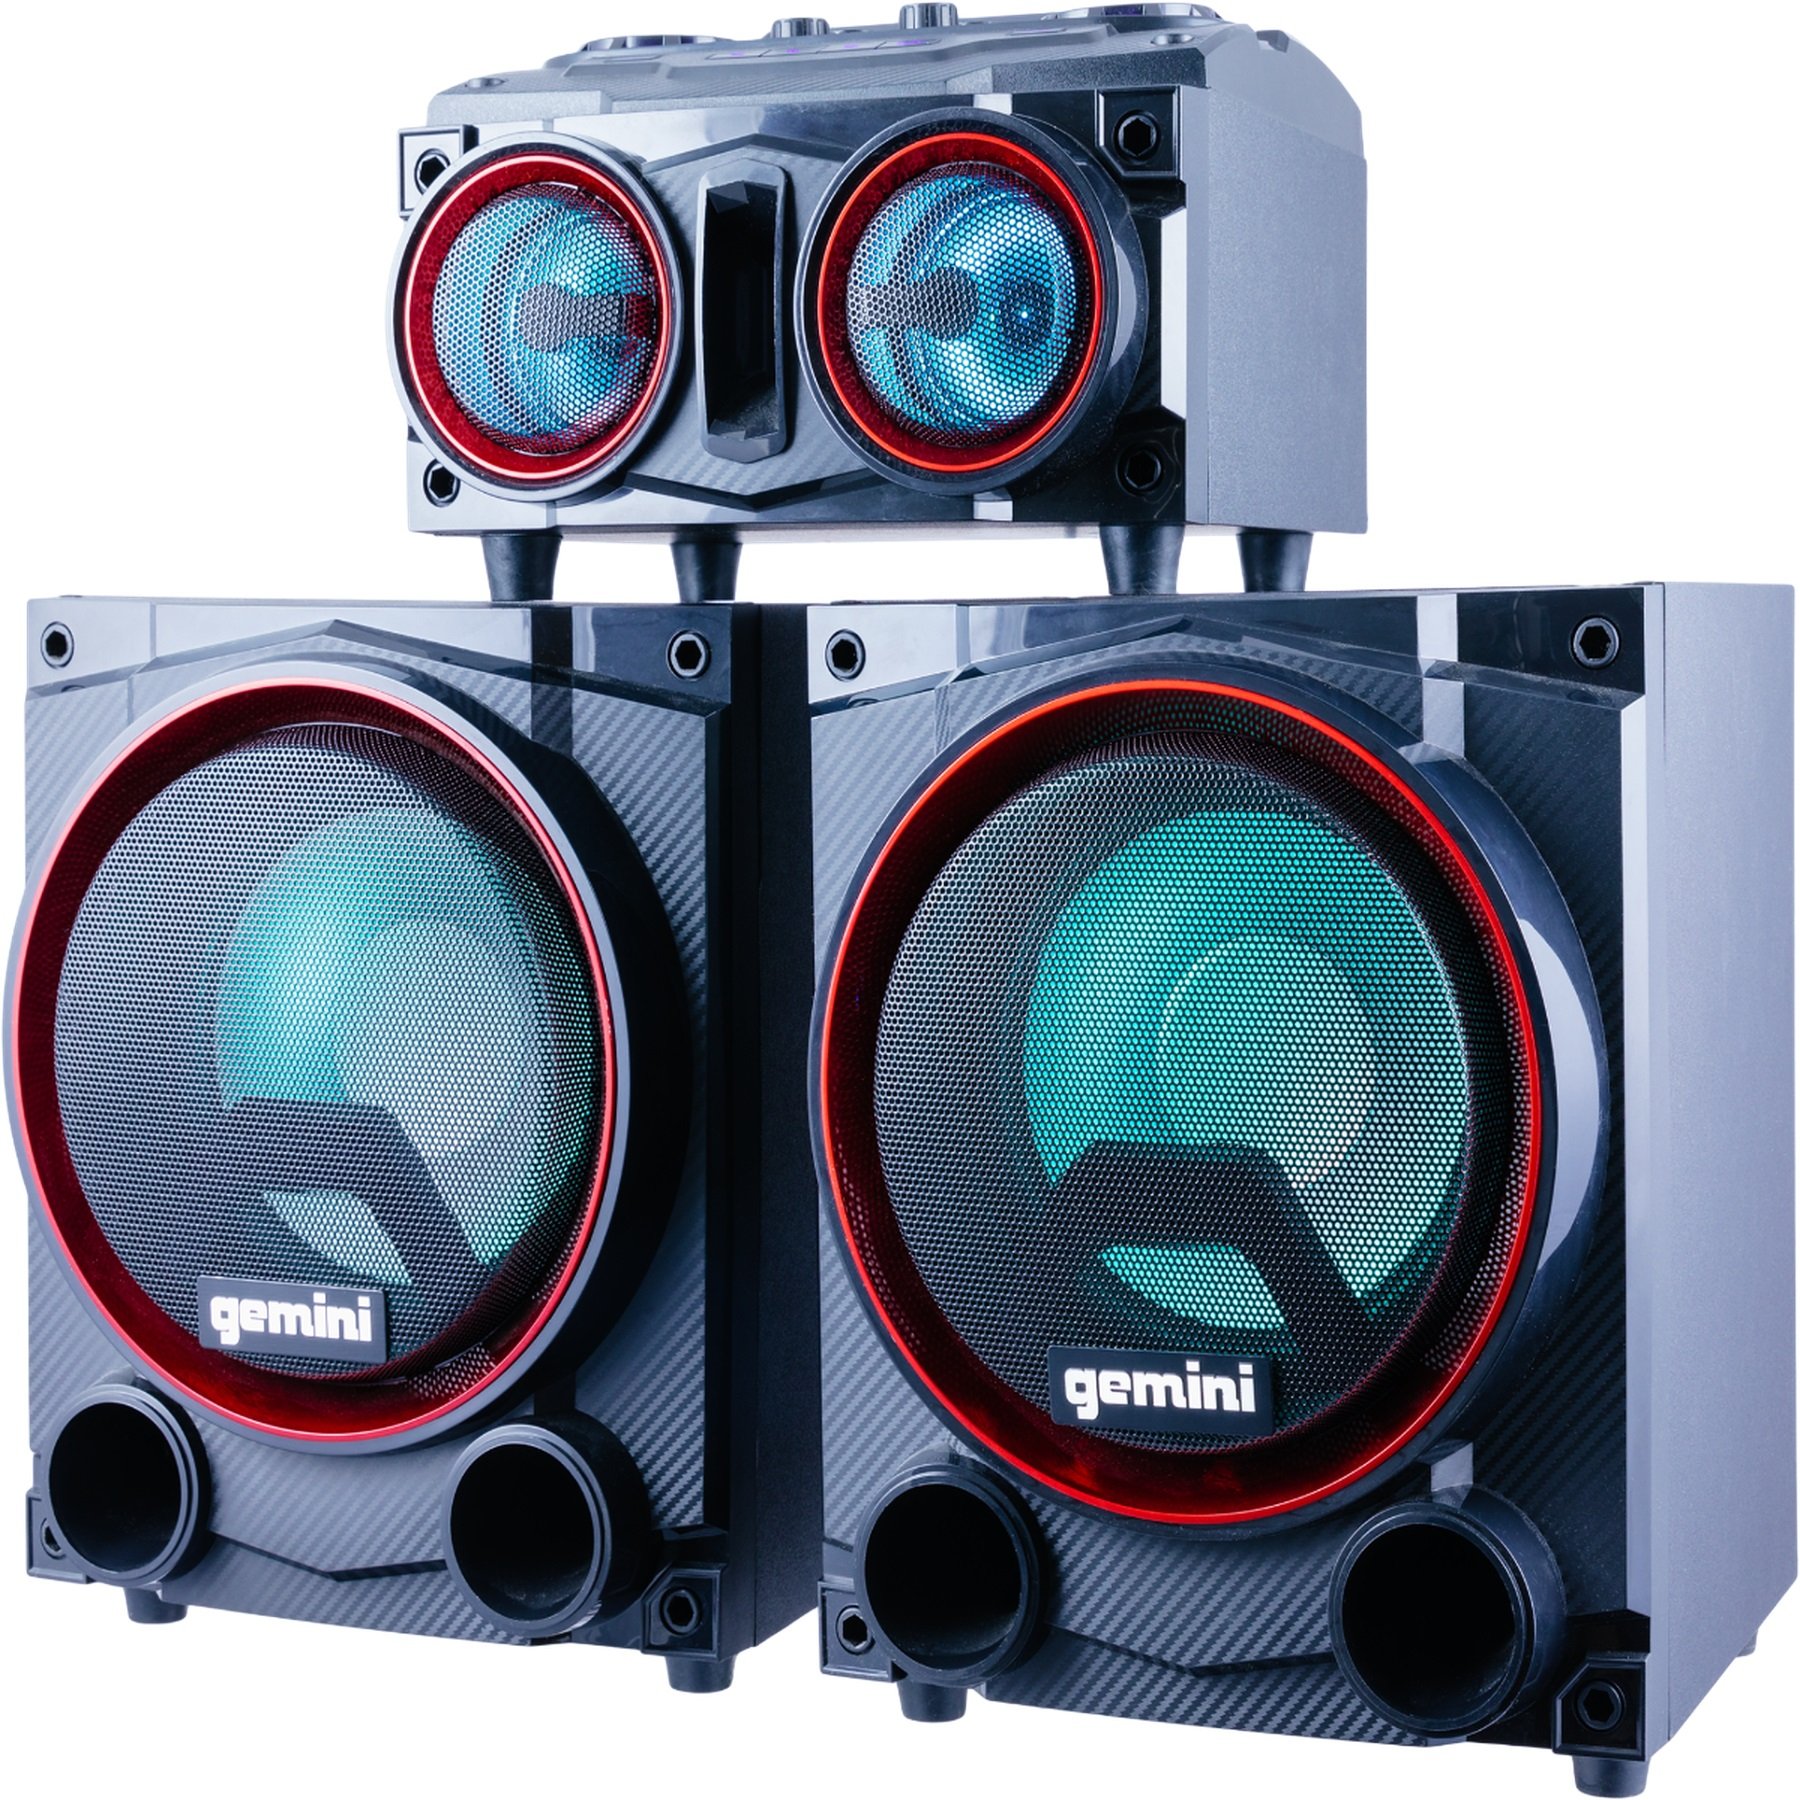 Photos - Portable Speaker Gemini GSYS-2000 2000W Bluetooth Party Speaker with Dual 8 Woofers 